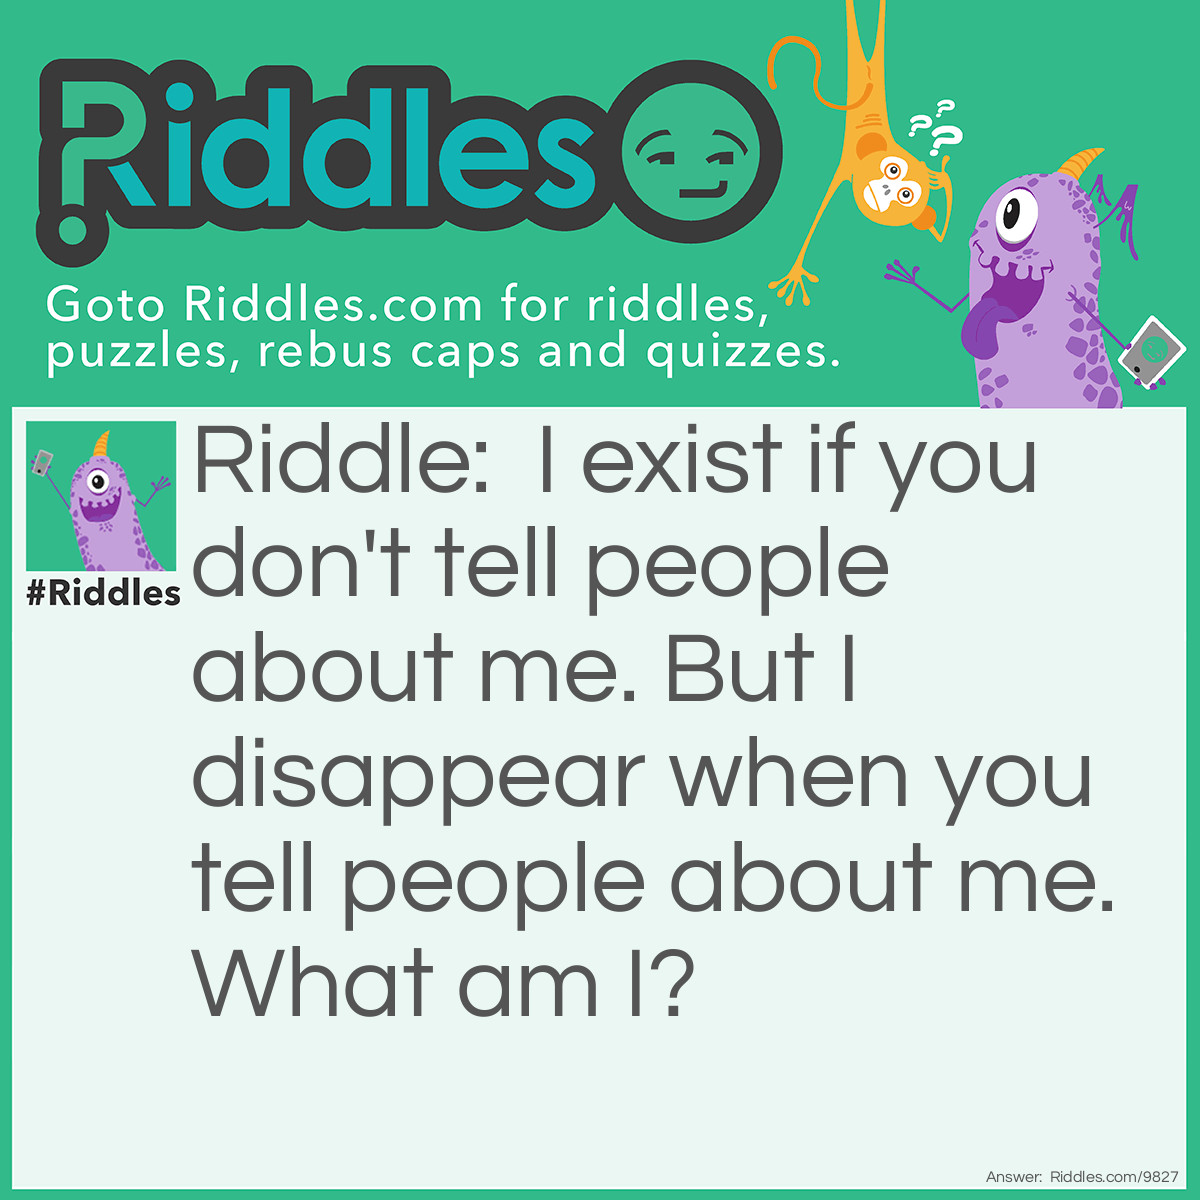 Riddle: I exist if you don't tell people about me. But I disappear when you tell people about me. What am I? Answer: Secret and Surprise.